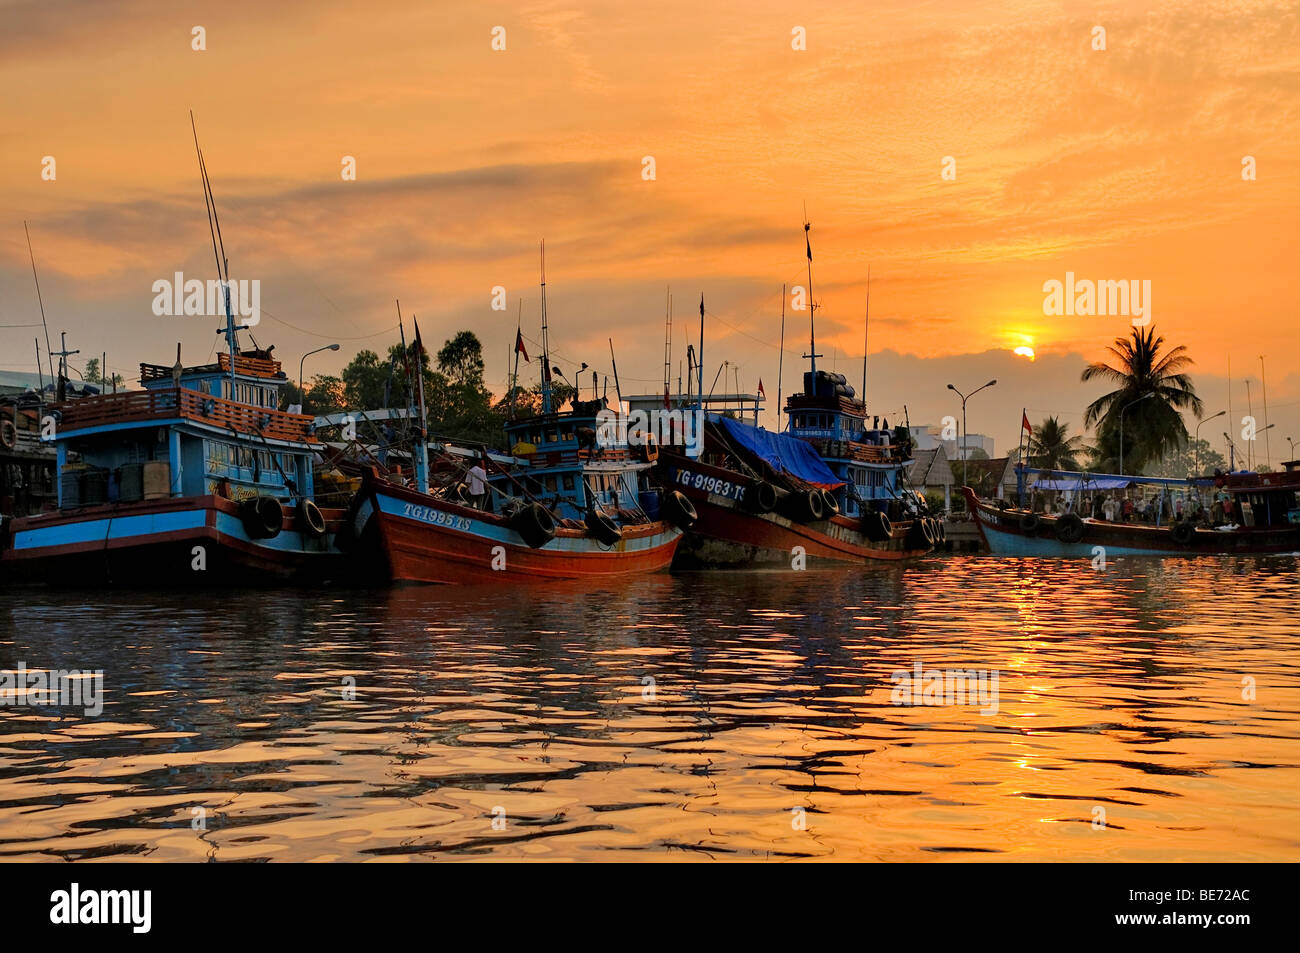 Fishing boats at sunset on the Mekong River, My Tho, Mekong Delta, Vietnam, Asia Stock Photo